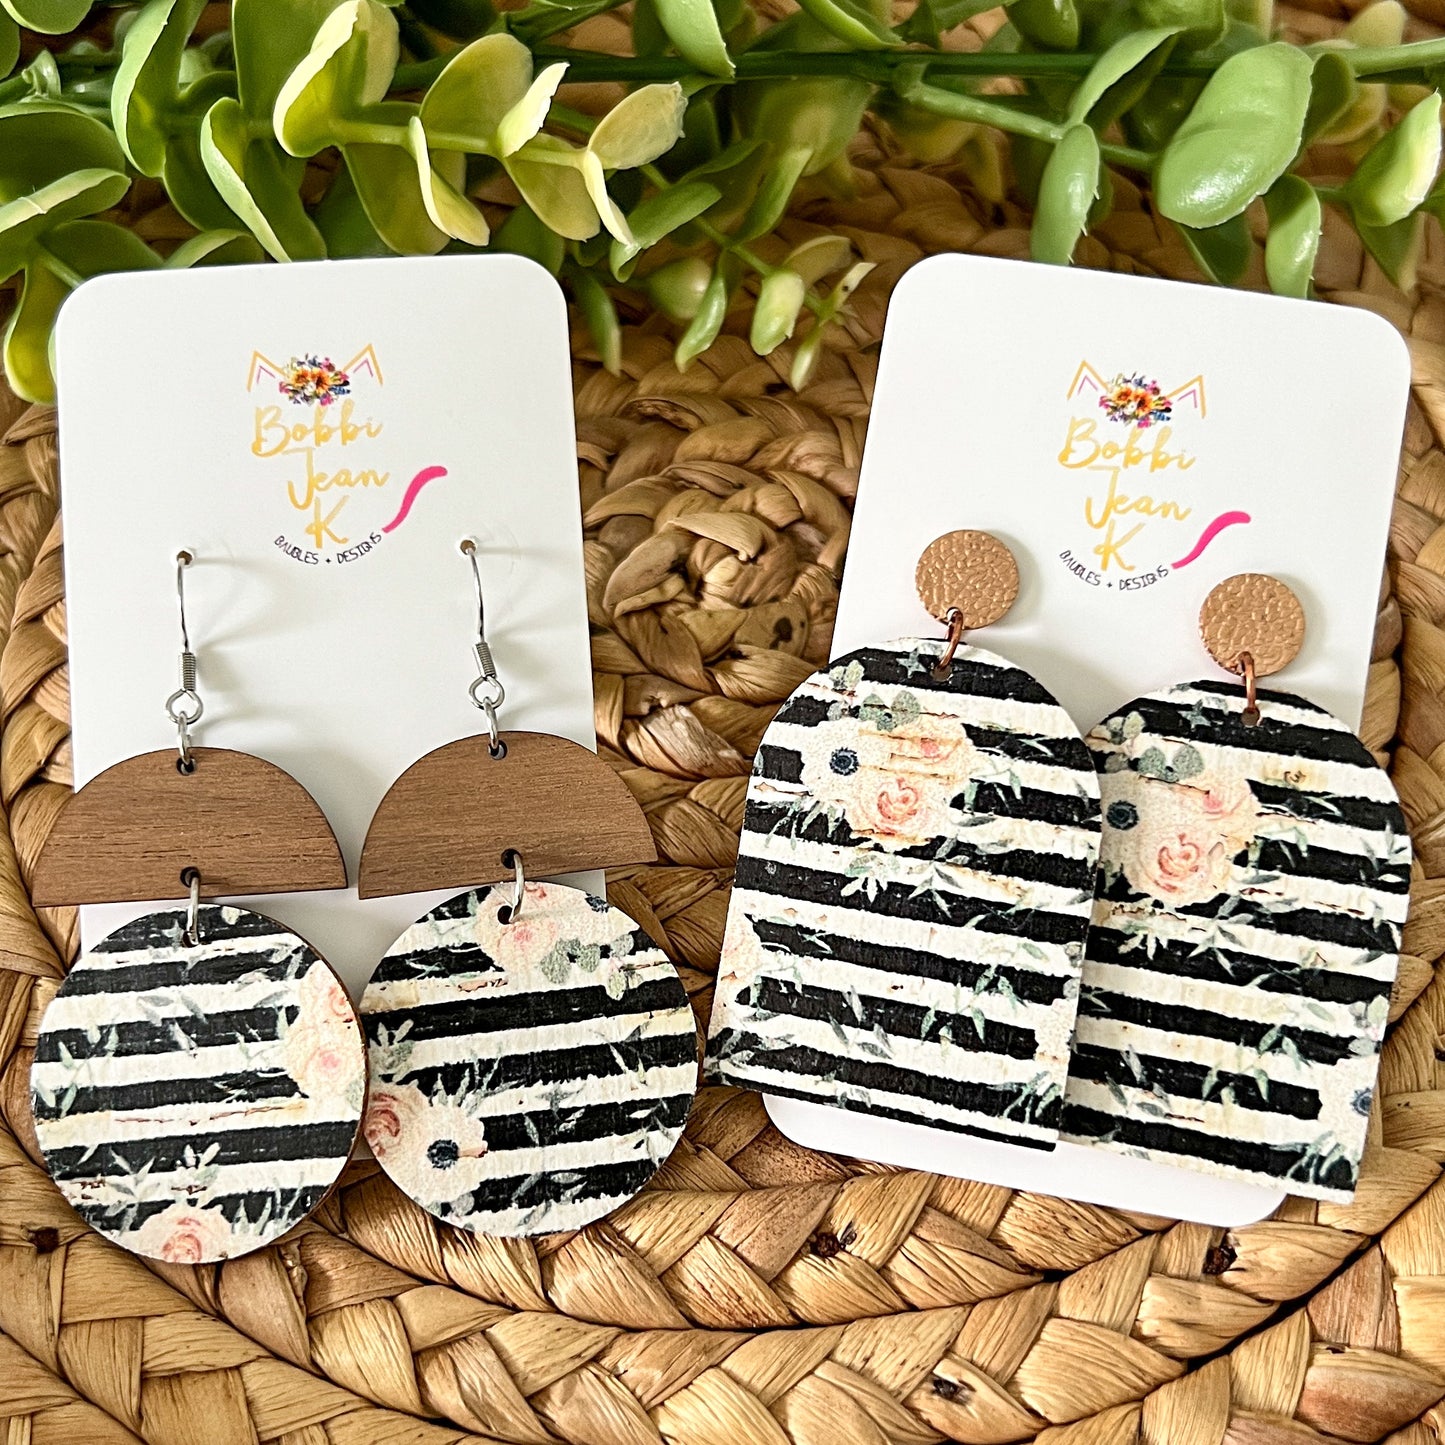 Black & White Striped Floral Cork on Leather Earrings: Choose From 2 Styles - LAST CHANCE